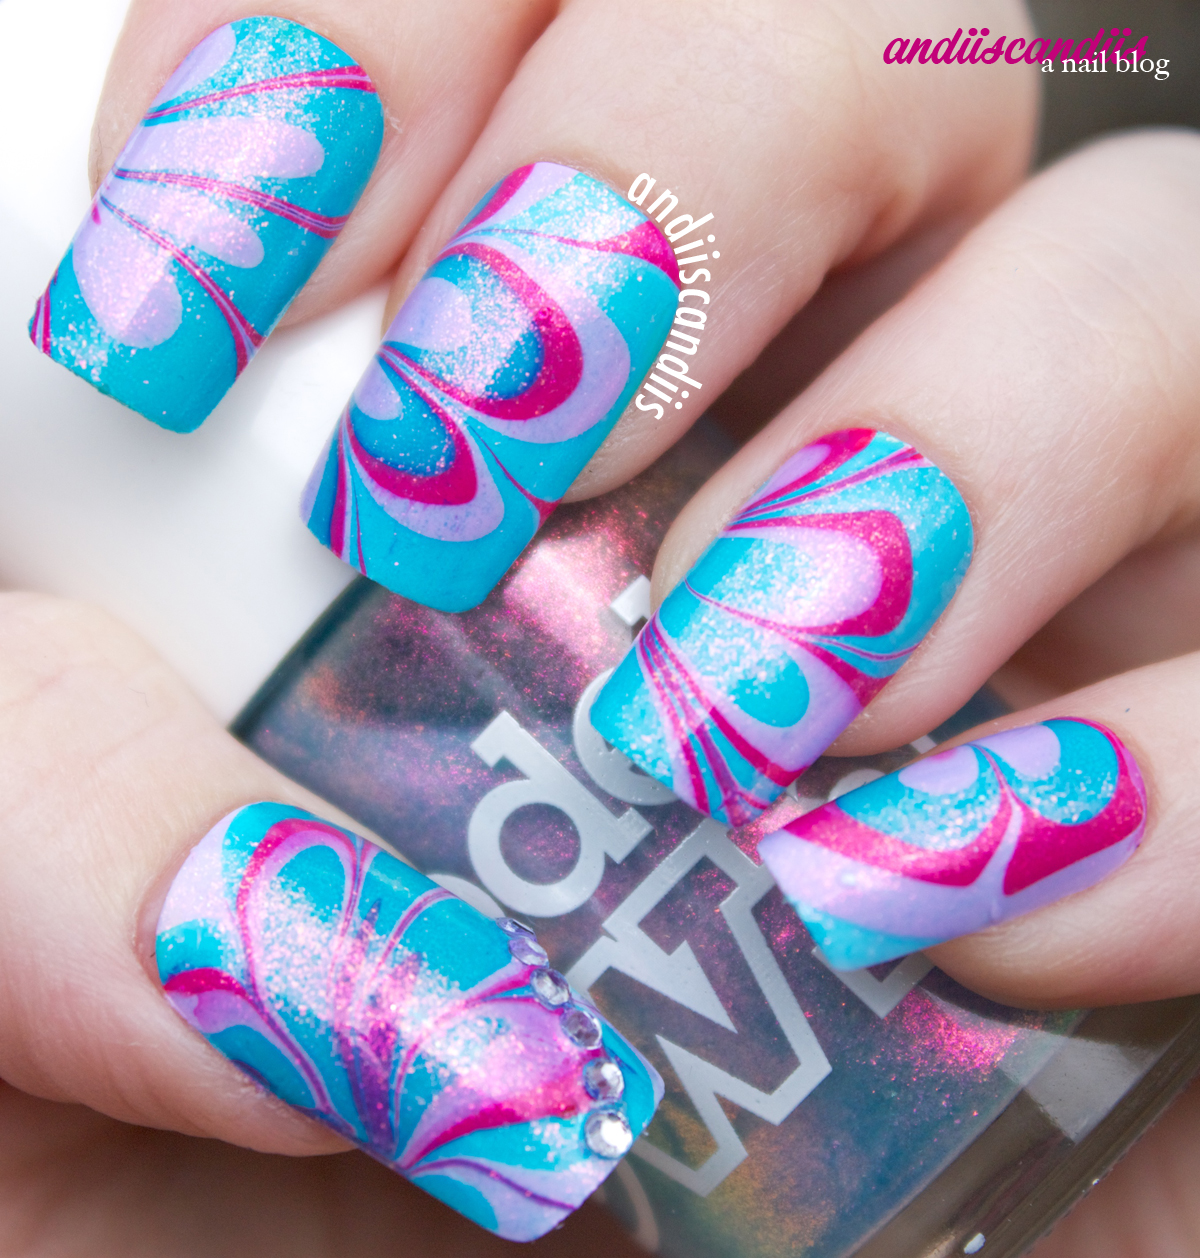 Andii's Candiis: Water Marble!